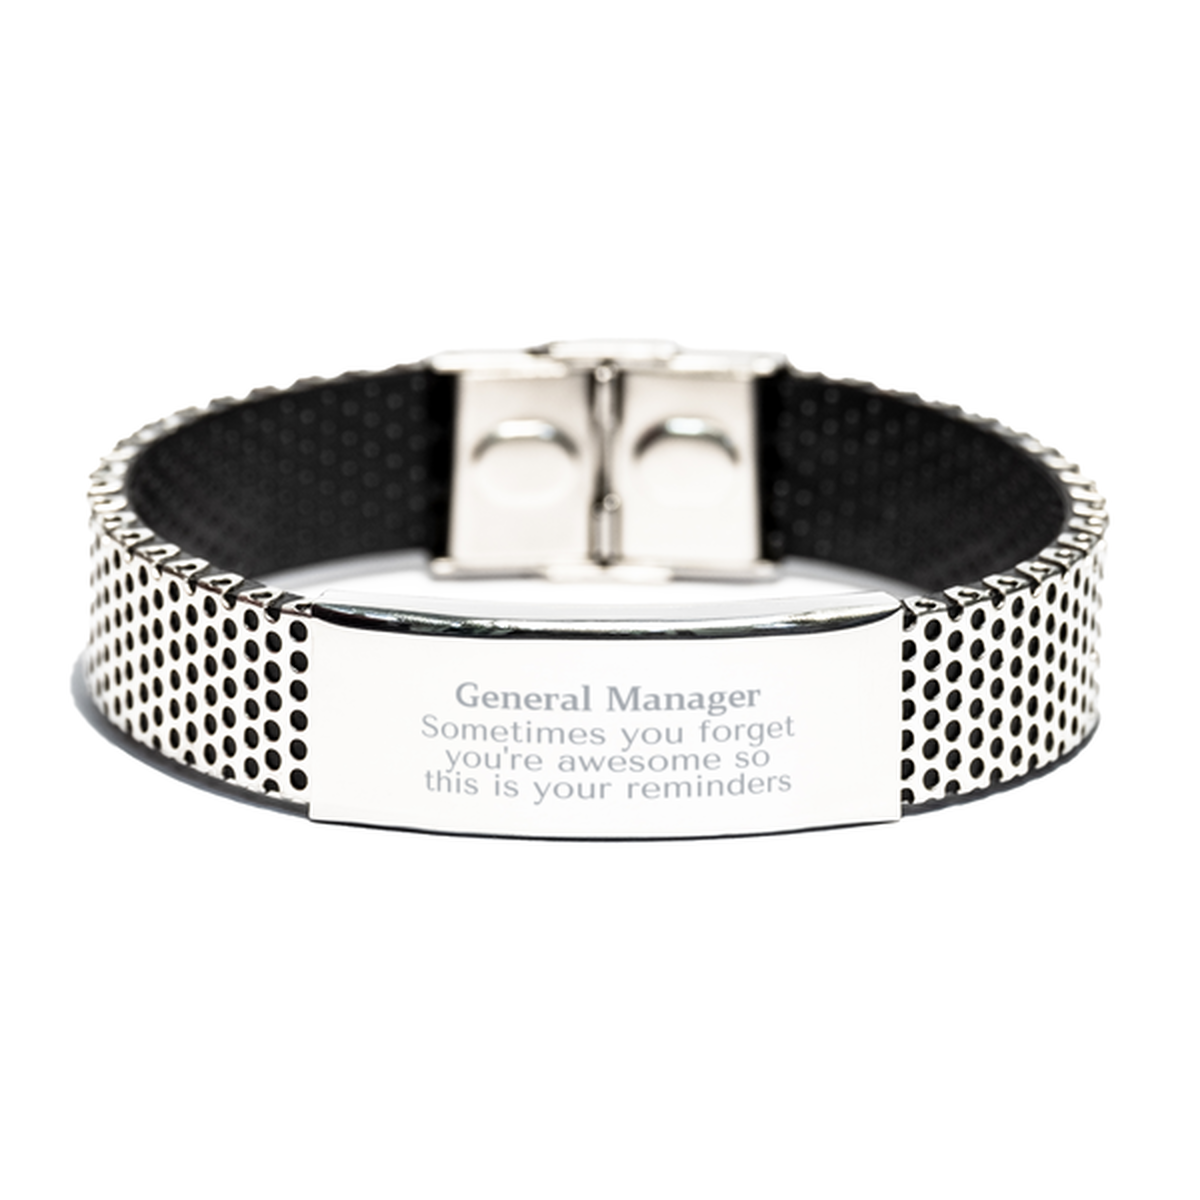 Sentimental General Manager Stainless Steel Bracelet, General Manager Sometimes you forget you're awesome so this is your reminders, Graduation Christmas Birthday Gifts for General Manager, Men, Women, Coworkers